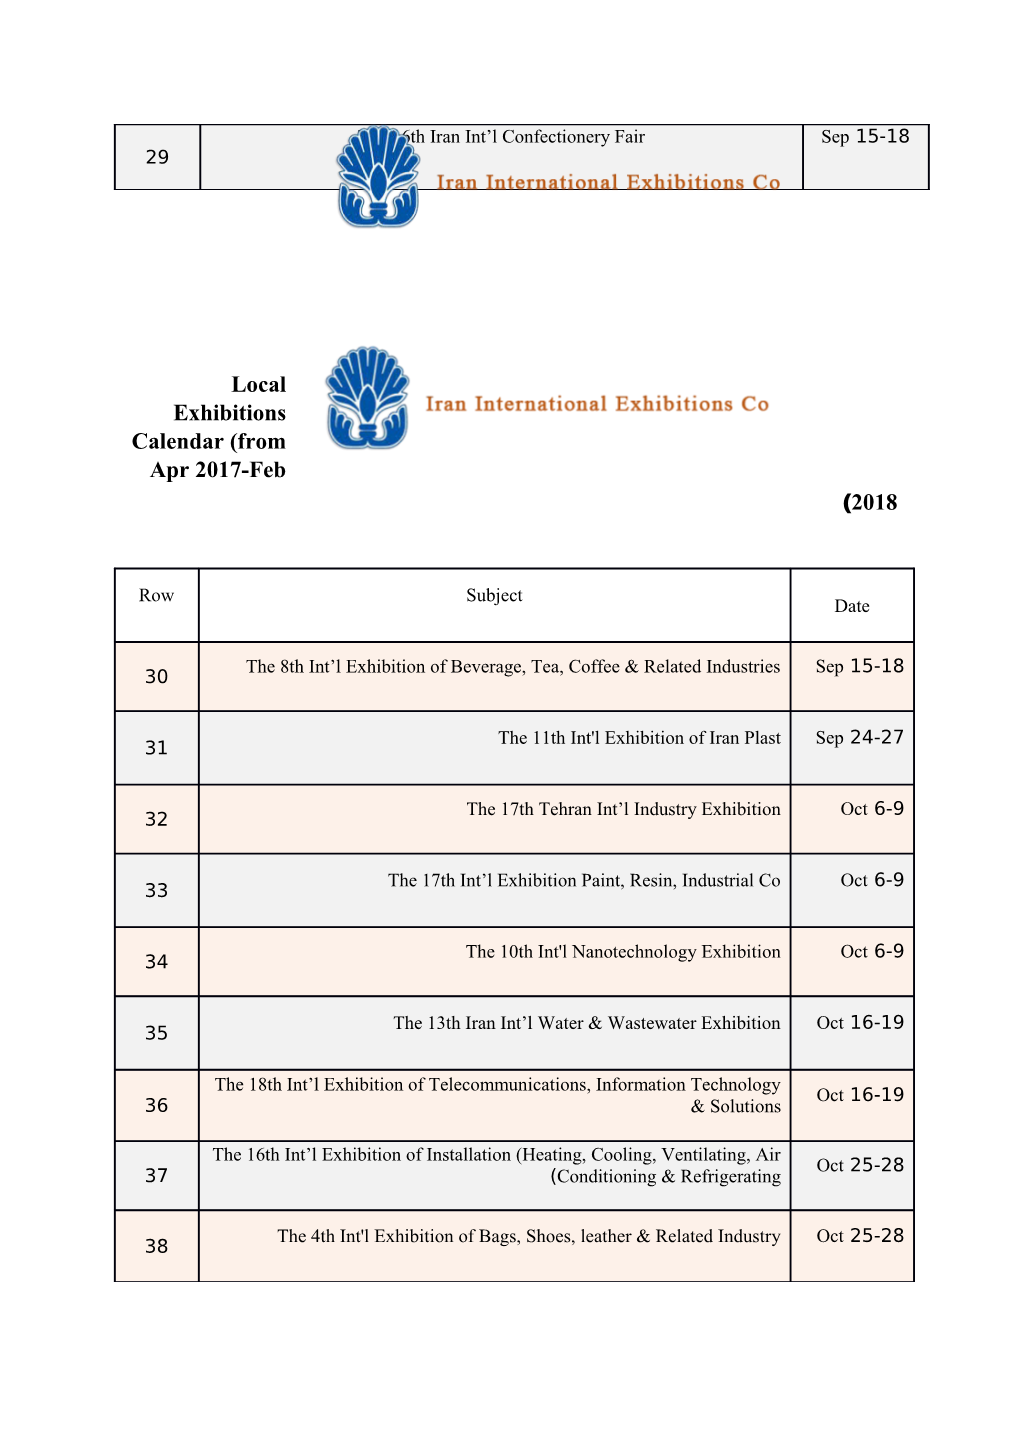 Local Exhibitions Calendar (From Apr 2017-Feb 2018)